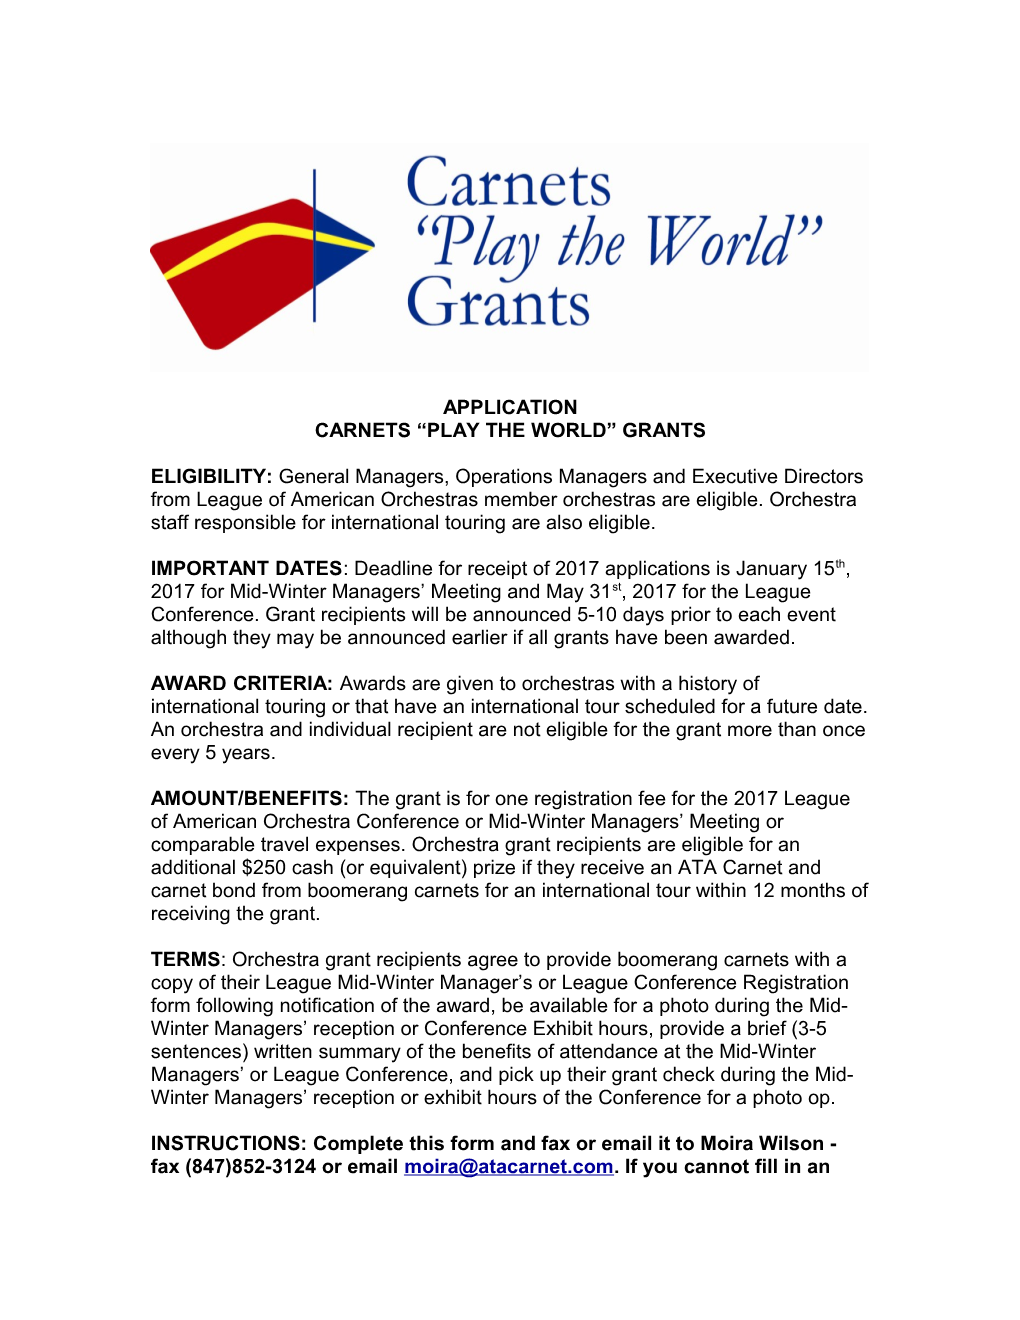 Carnets Play the World Grants